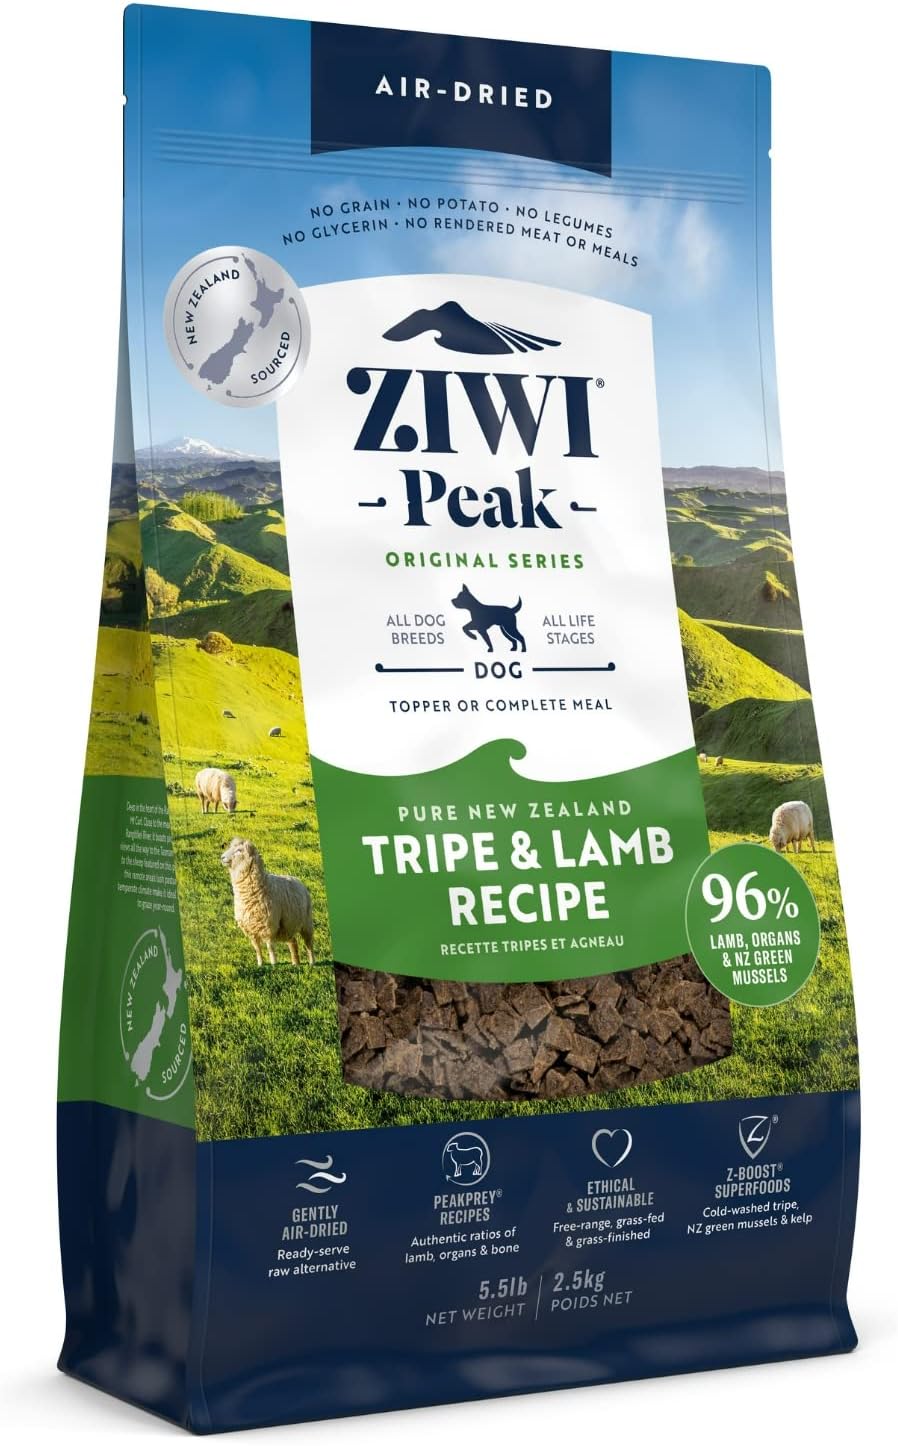 ZIWI Peak Air-Dried Dog Food – All Natural, High Protein, Grain Free & Limited Ingredient with Superfoods (Tripe & Lamb, 5.5 lb)